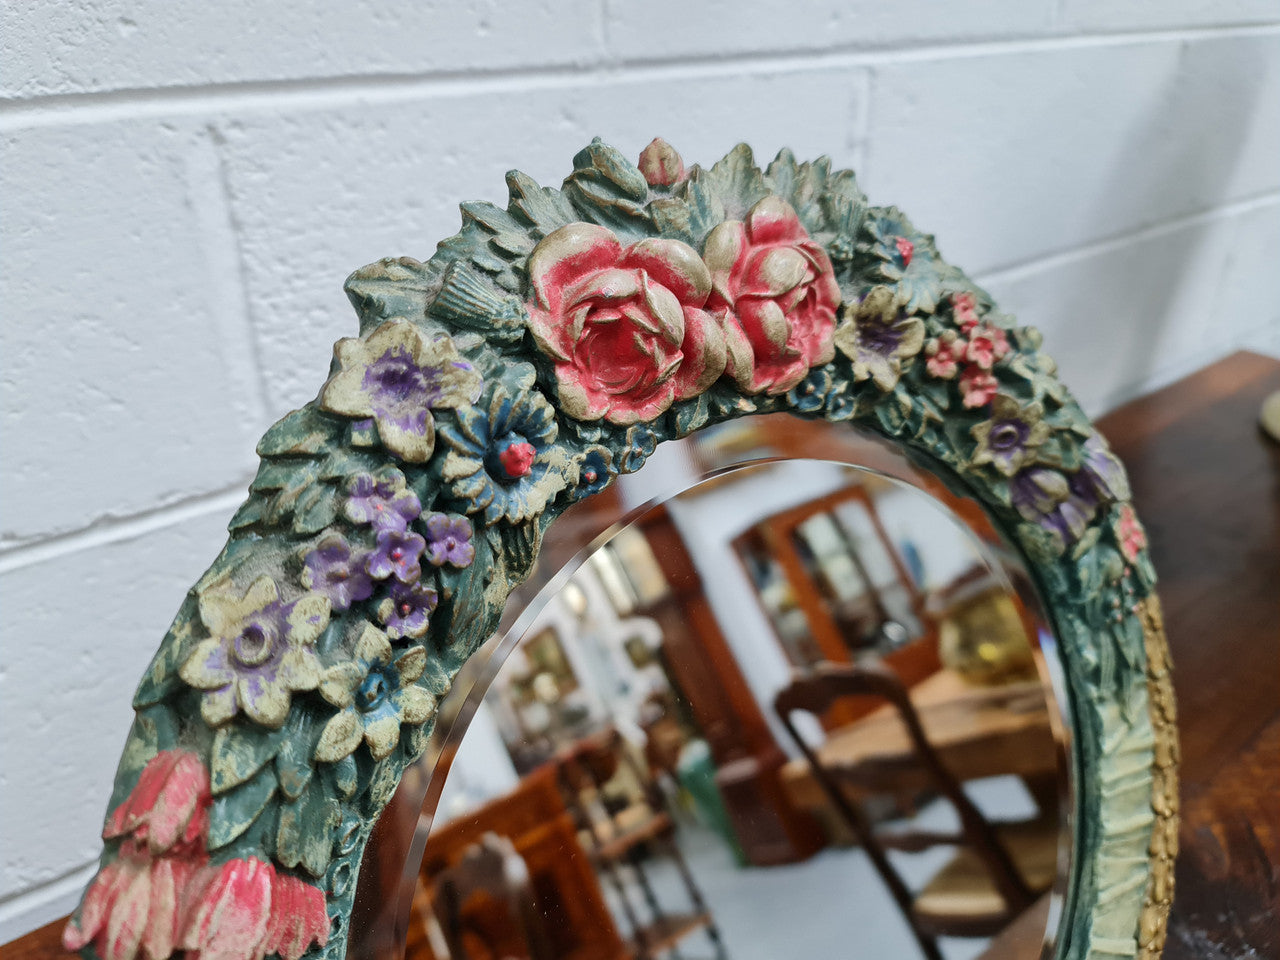 Beautifully decorated Barbola round bevelled edge mirror. In good original condition.